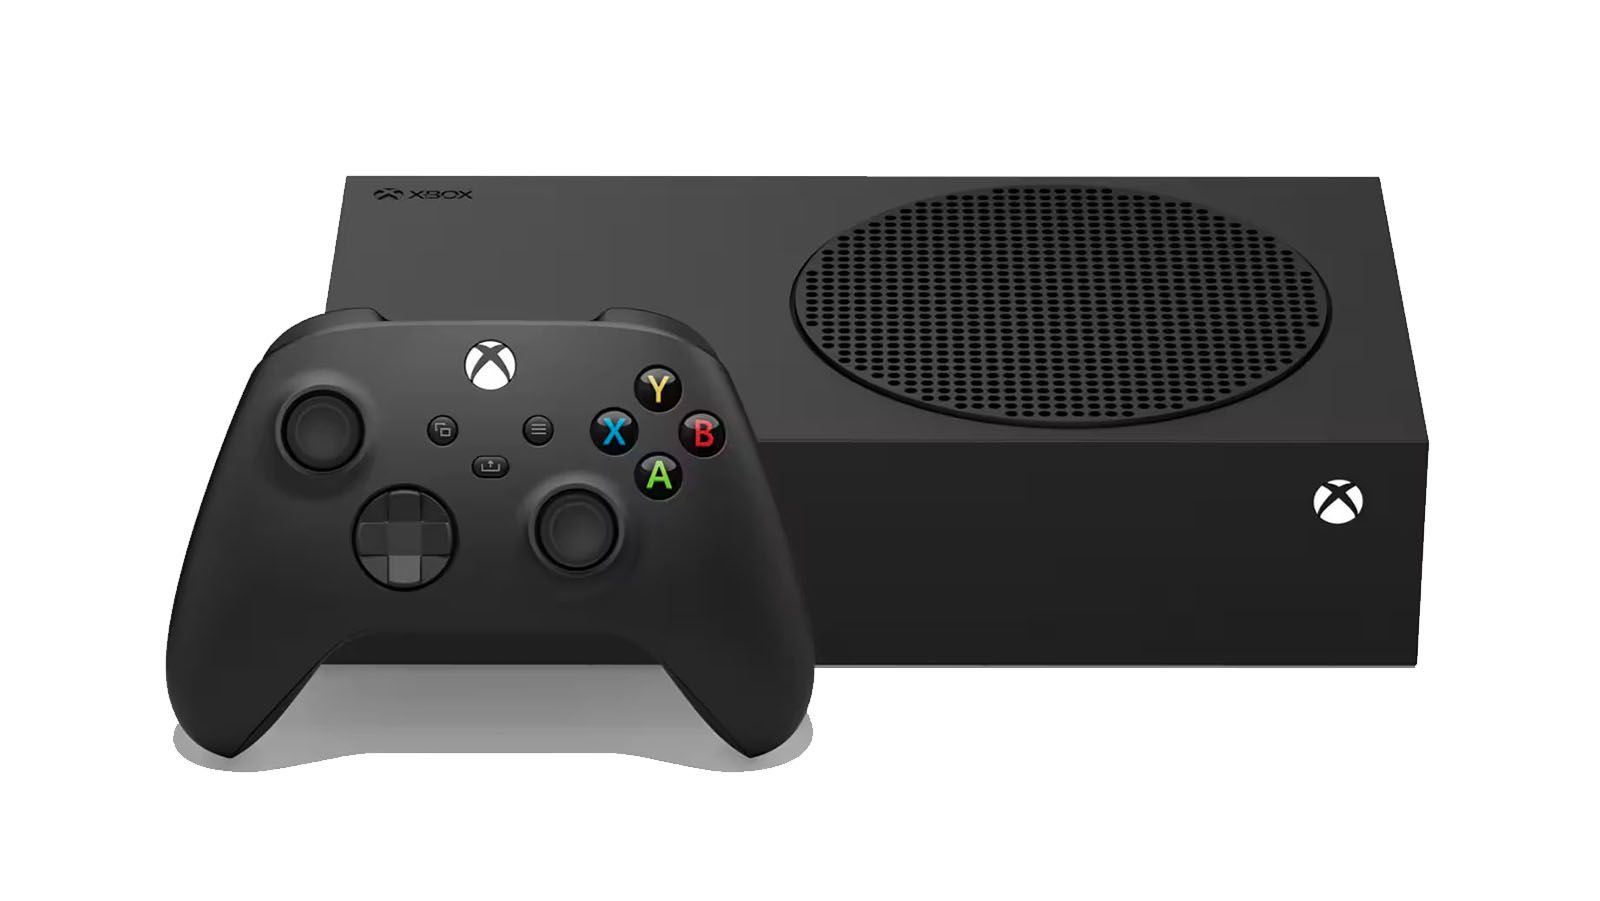 Cyber Monday 2019 - Best Xbox One deals